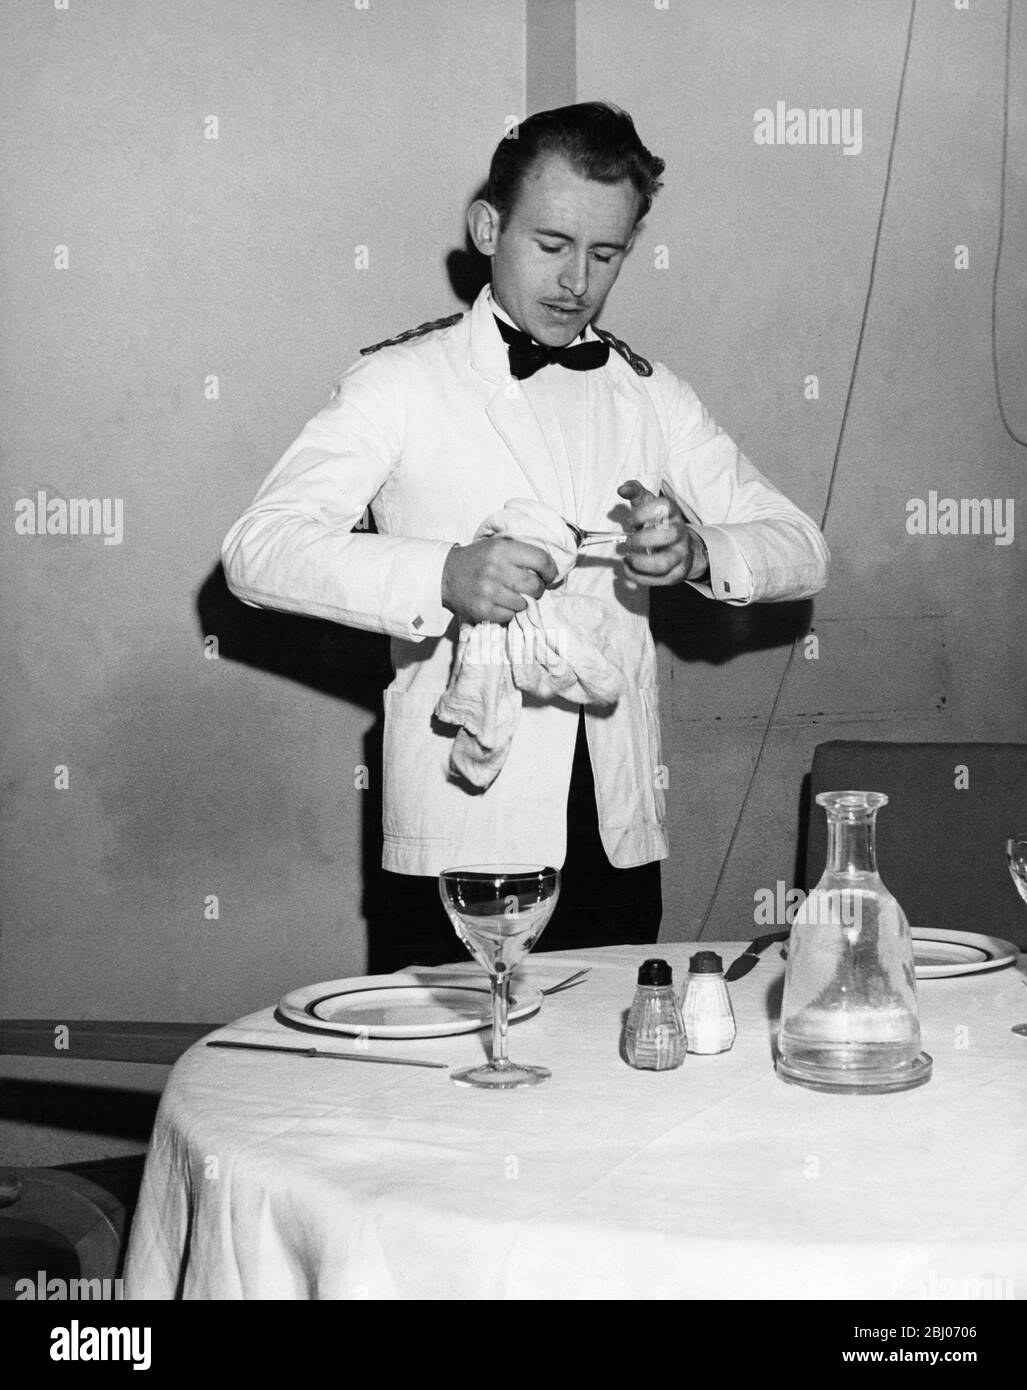 A waiter polishes a glass while setting the table ready for the evenings restaurant diners Stock Photo